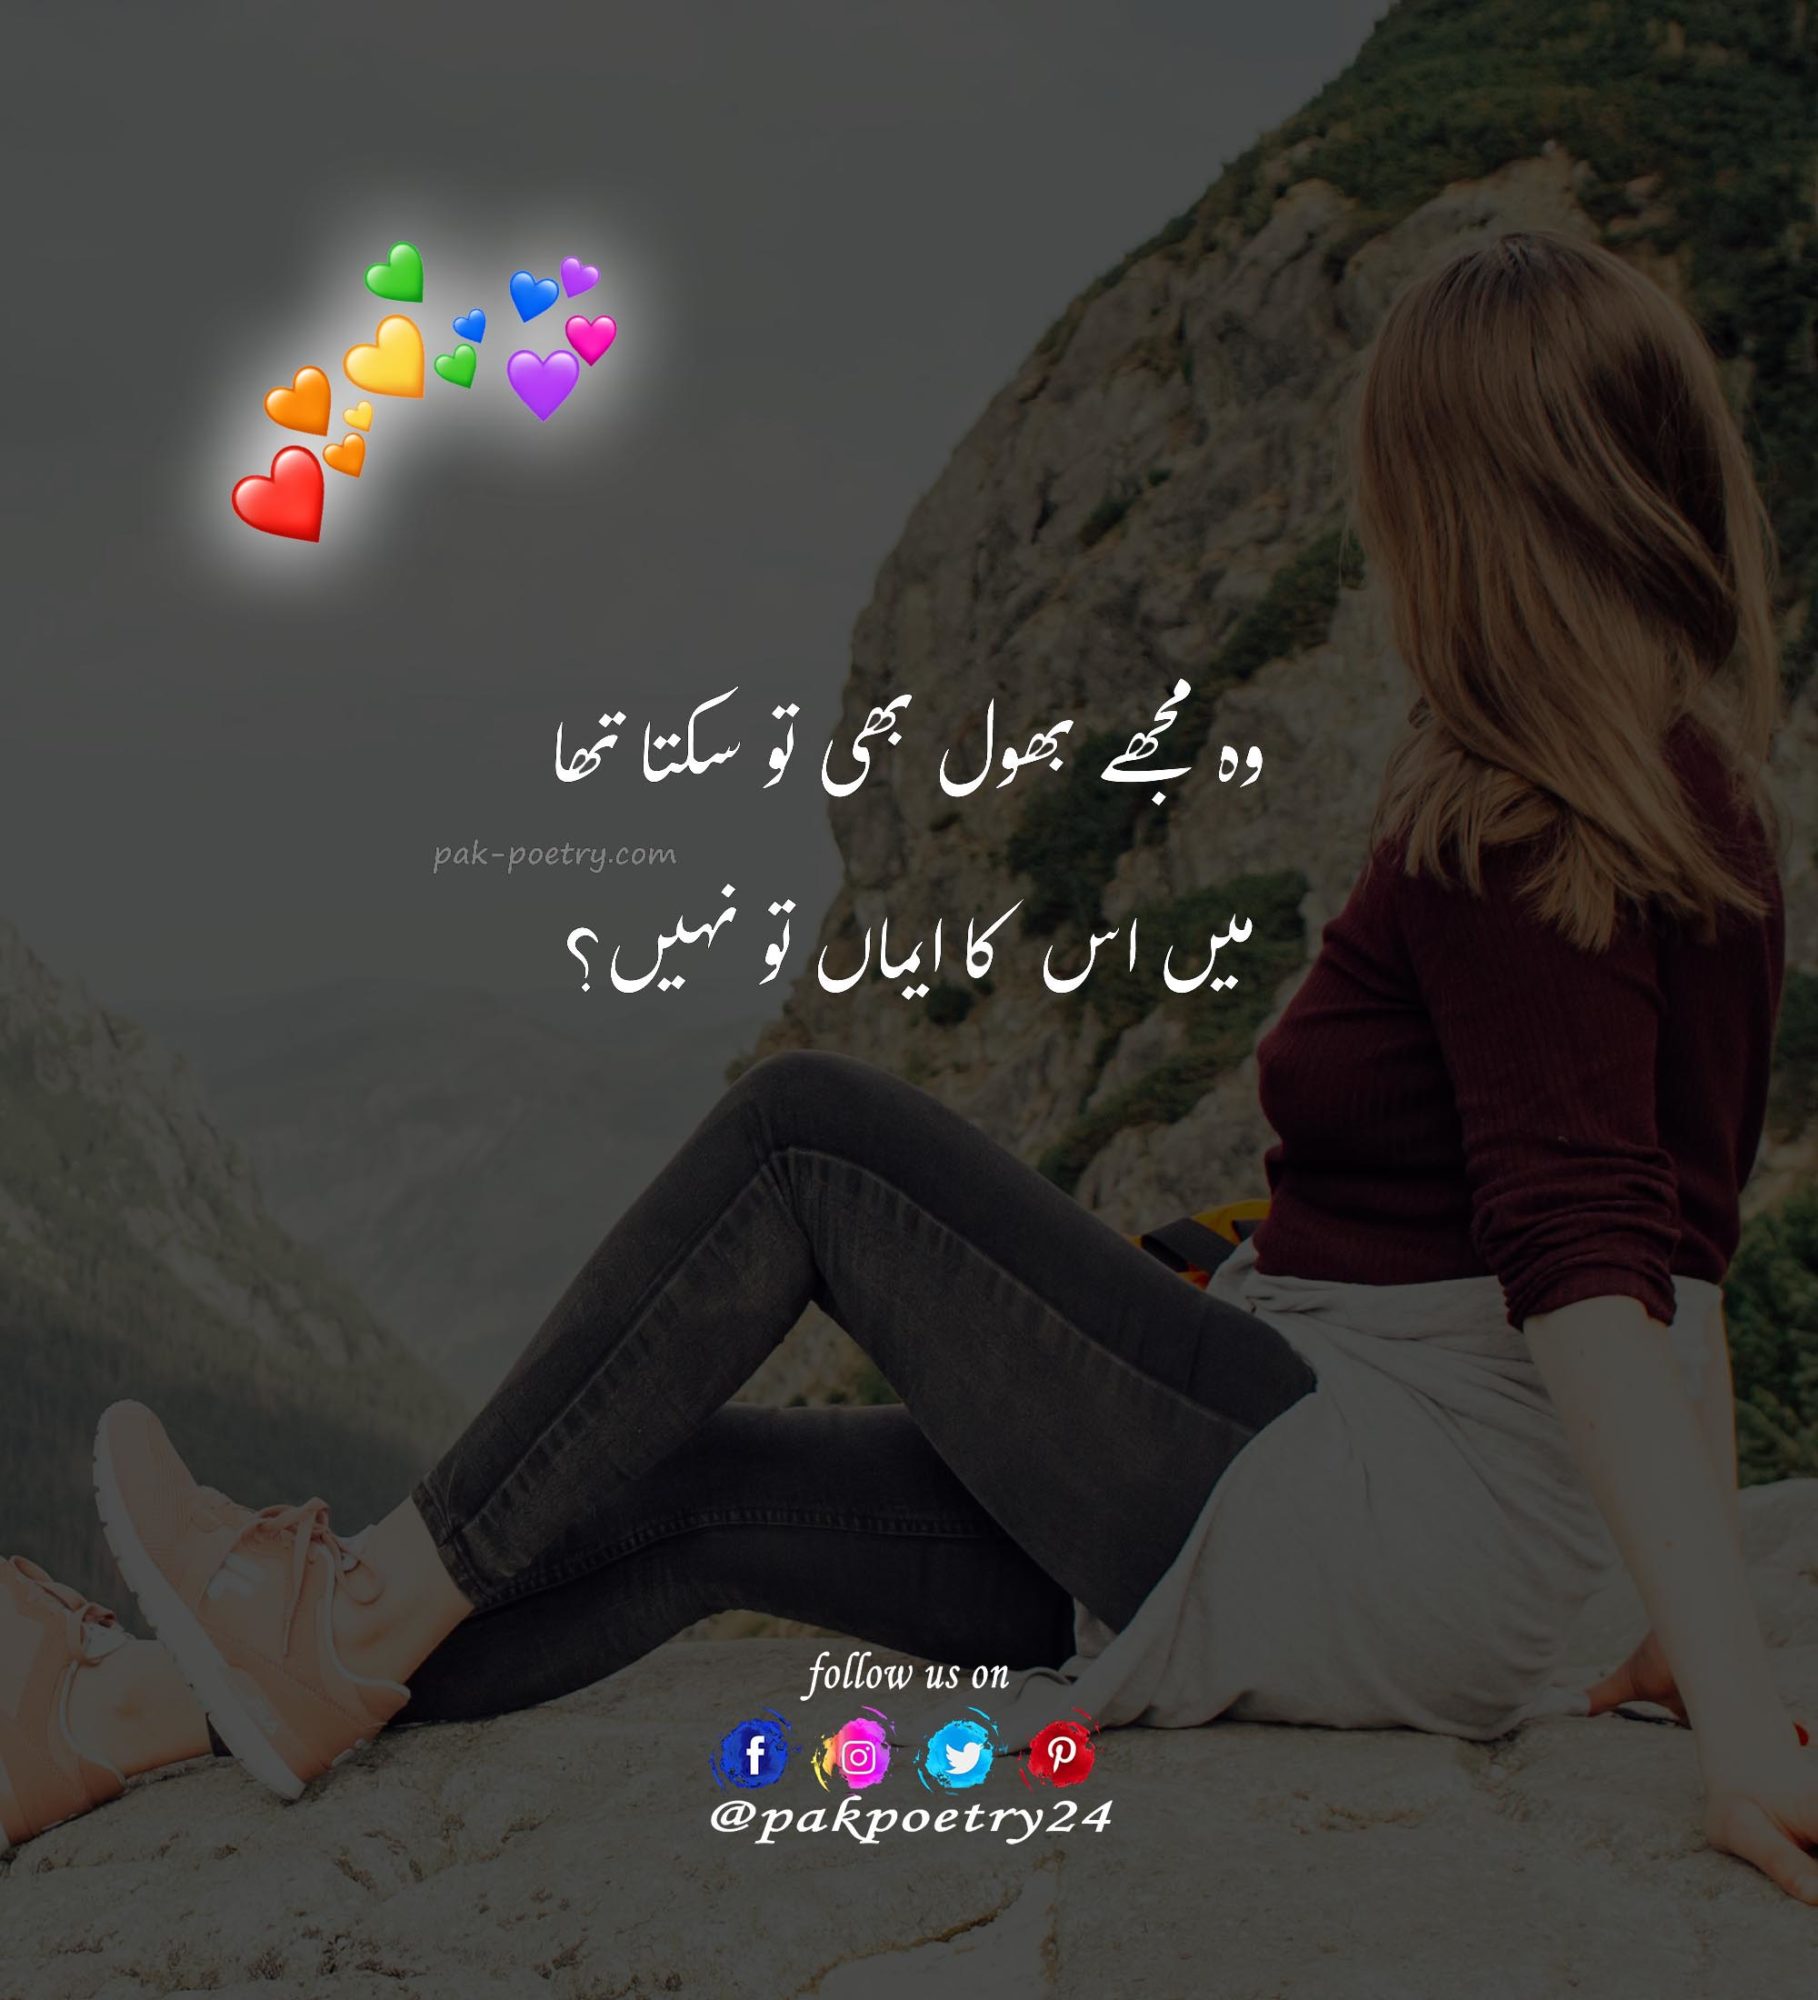 urdu poetry, poetry in urdu, poetry urdu, poetry, urdu shayari, potry in urdu, baat poetry, poetry.in.urdu, urdu poetry pic, poetry into urdu, urdu. poetry, porty urdu, urdu pietry, romantic poetry, romantic poetry in urdu, urdu romantic poetry, poetry romantic, romantic poetry urdu, poetry in urdu romantic, romantic poetry pics, love poetry in urdu romantic, romentic poetry, poetry, romantic pics poetry, poetry urdu romantic, love poetry in urdu, romantic poetry pic,